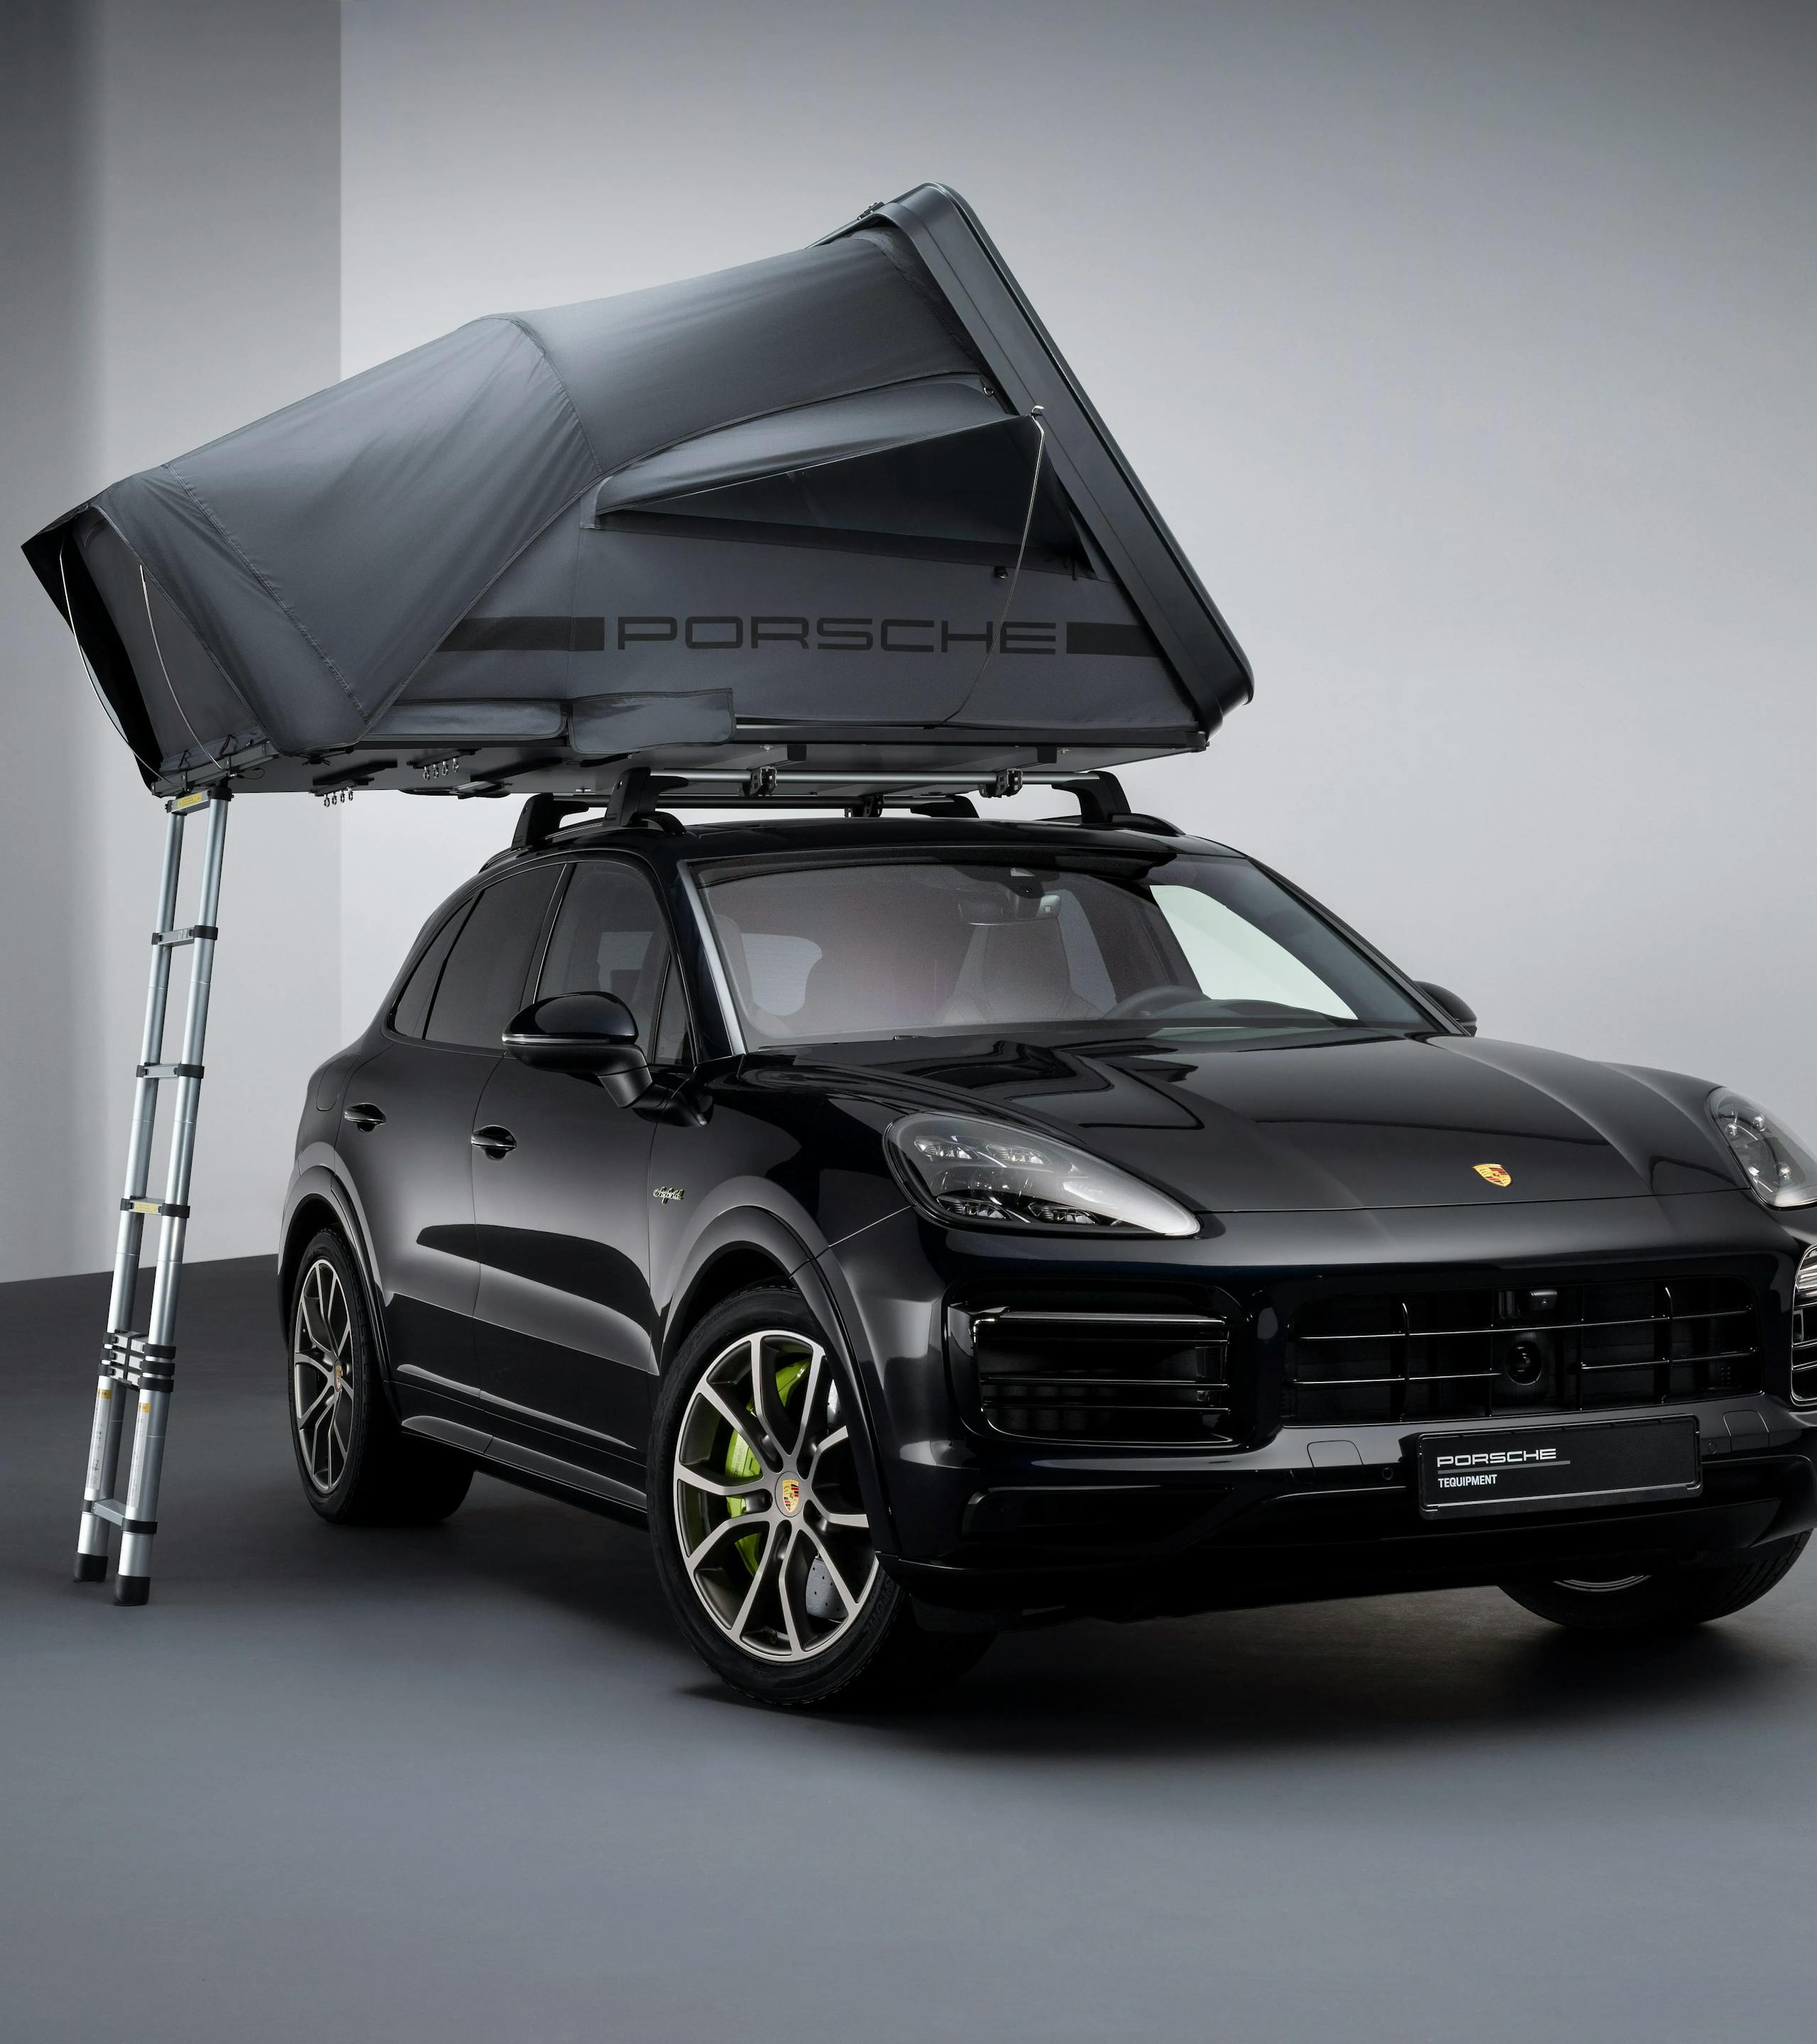 Roof Tent